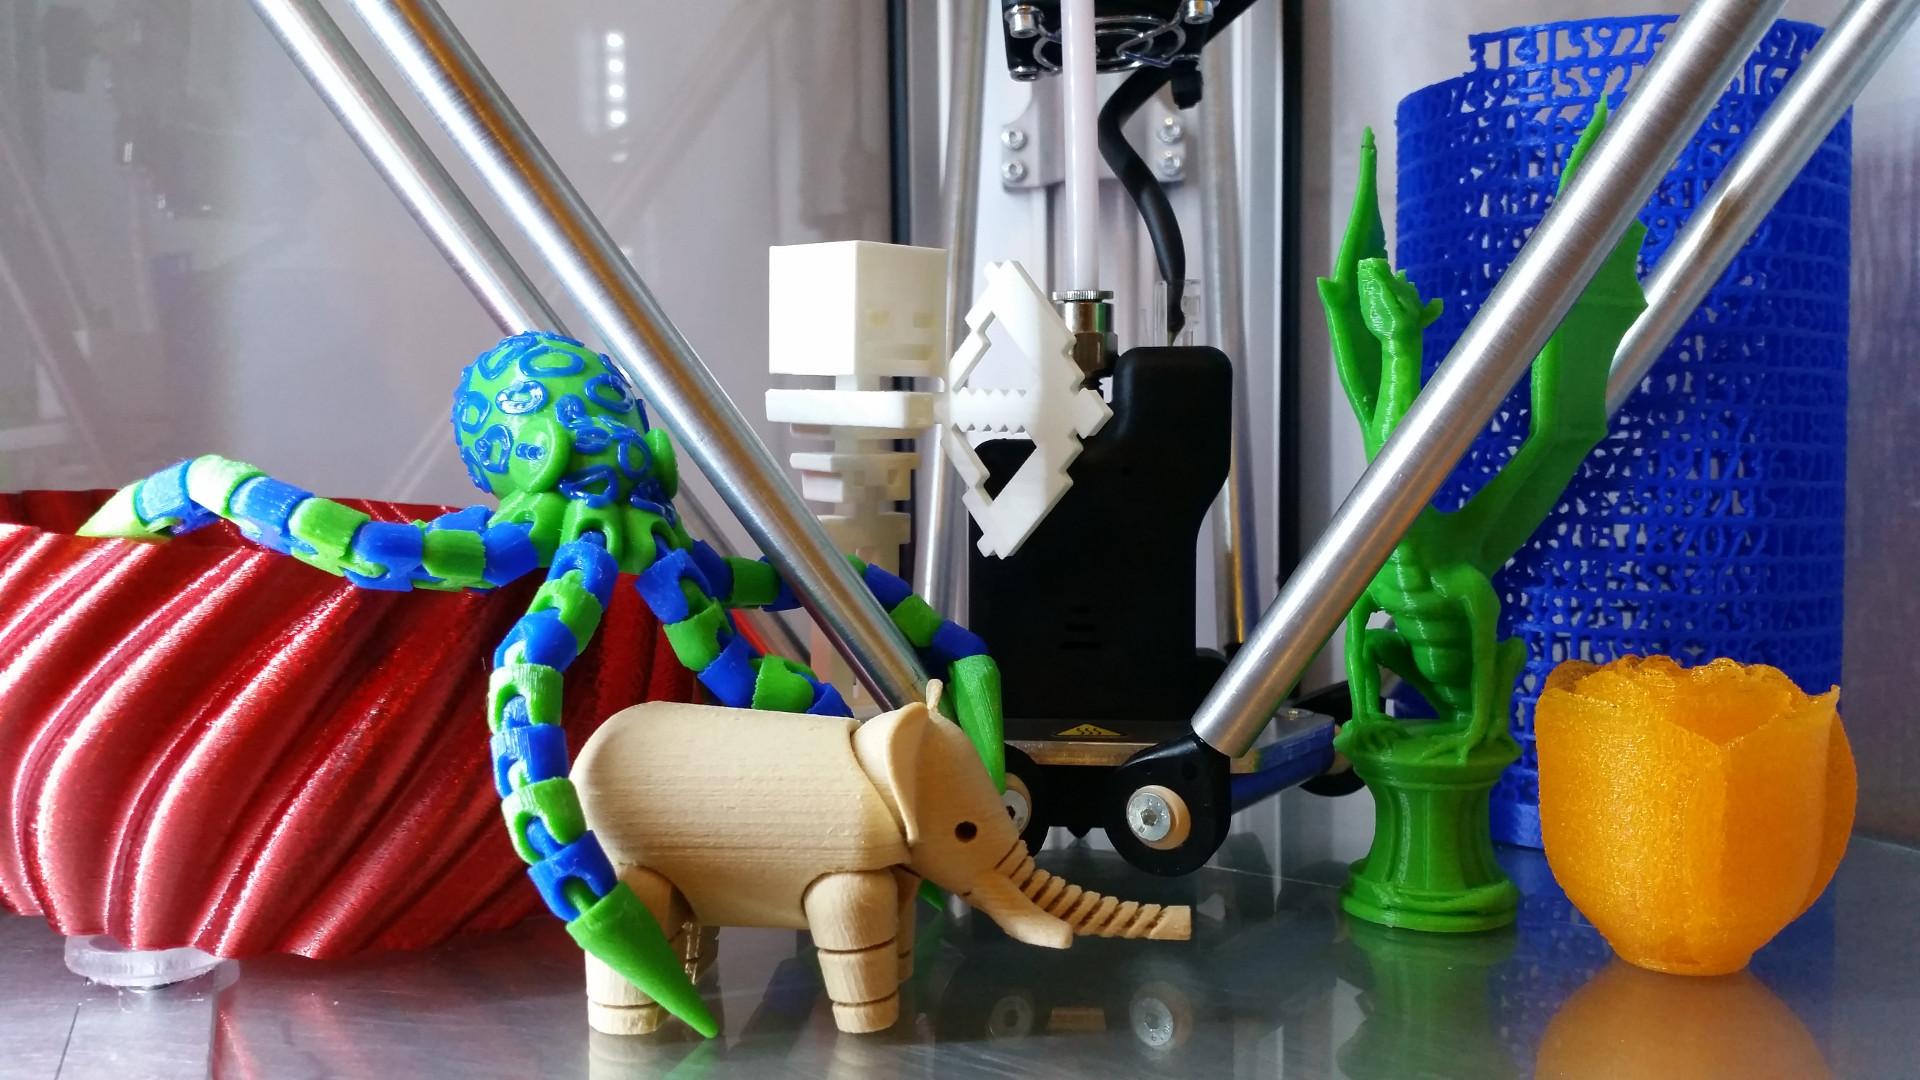 The Best Articulated Dragon Models - Flexible Print in Place for 3D Printing